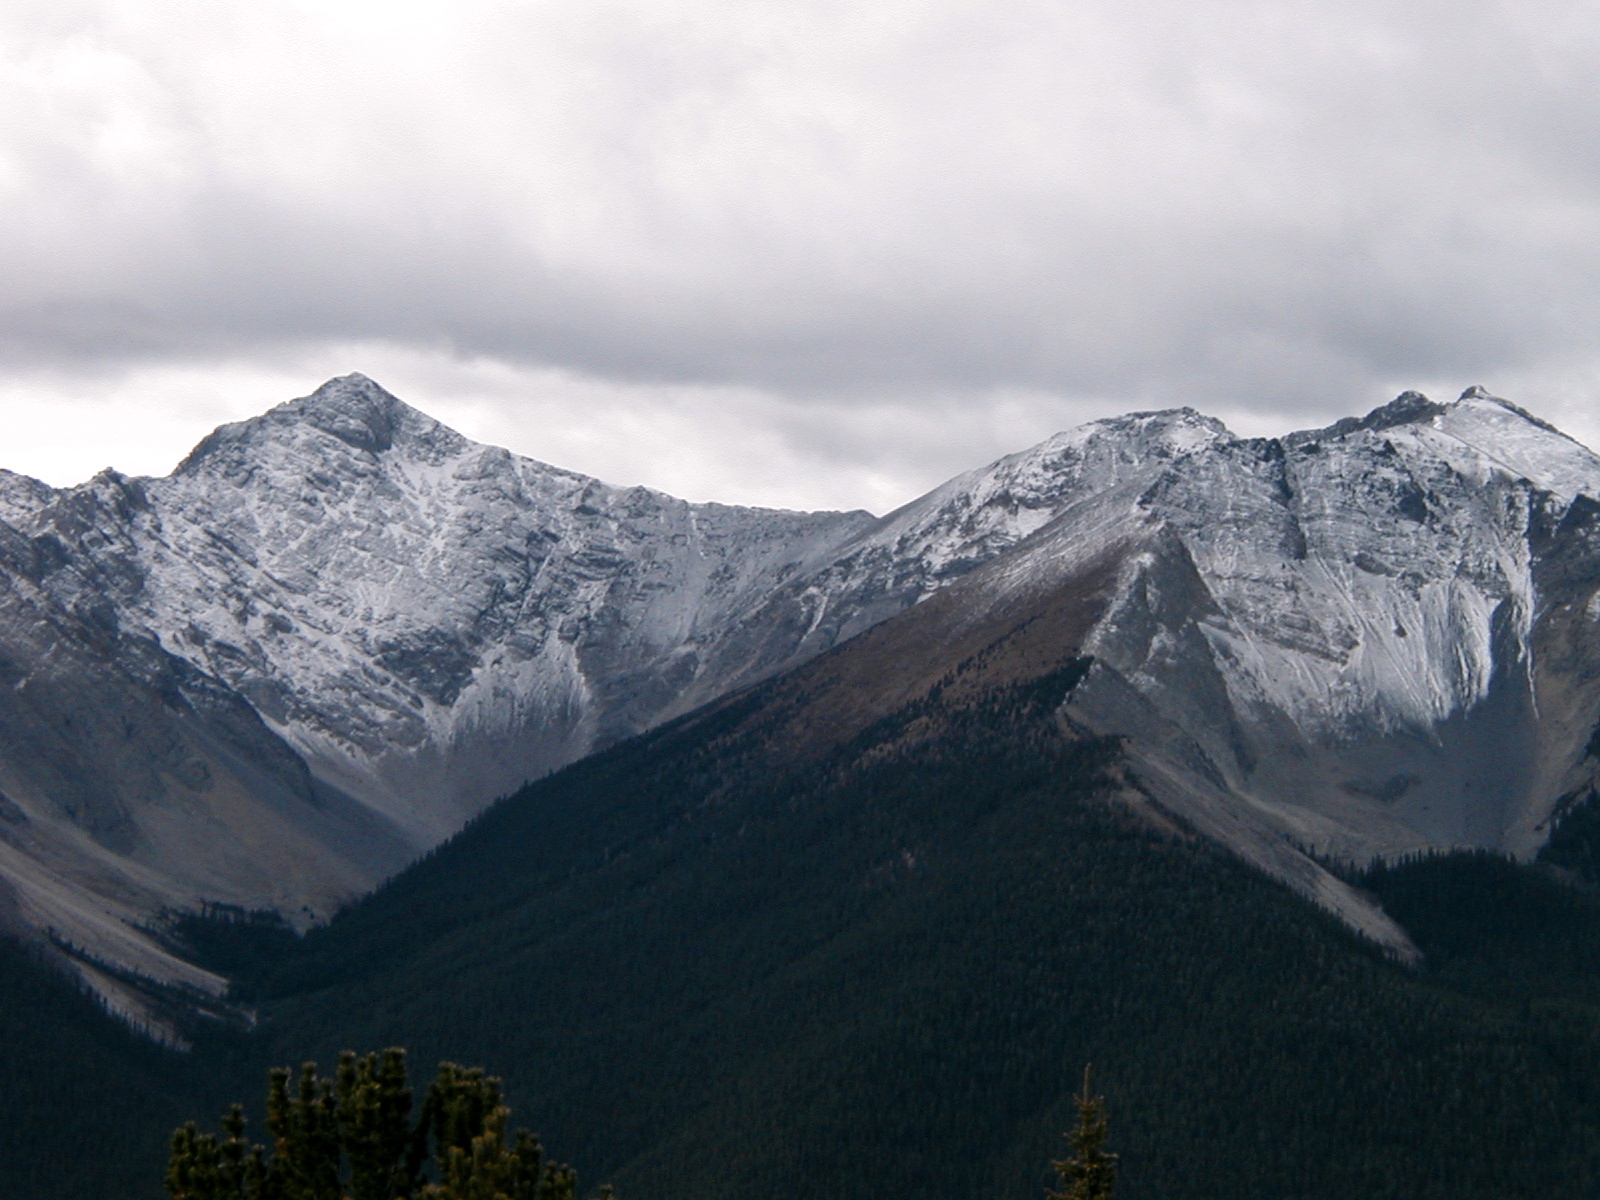 File:View from the top of Sulphur Mountain 02.jpg - Wikimedia Commons